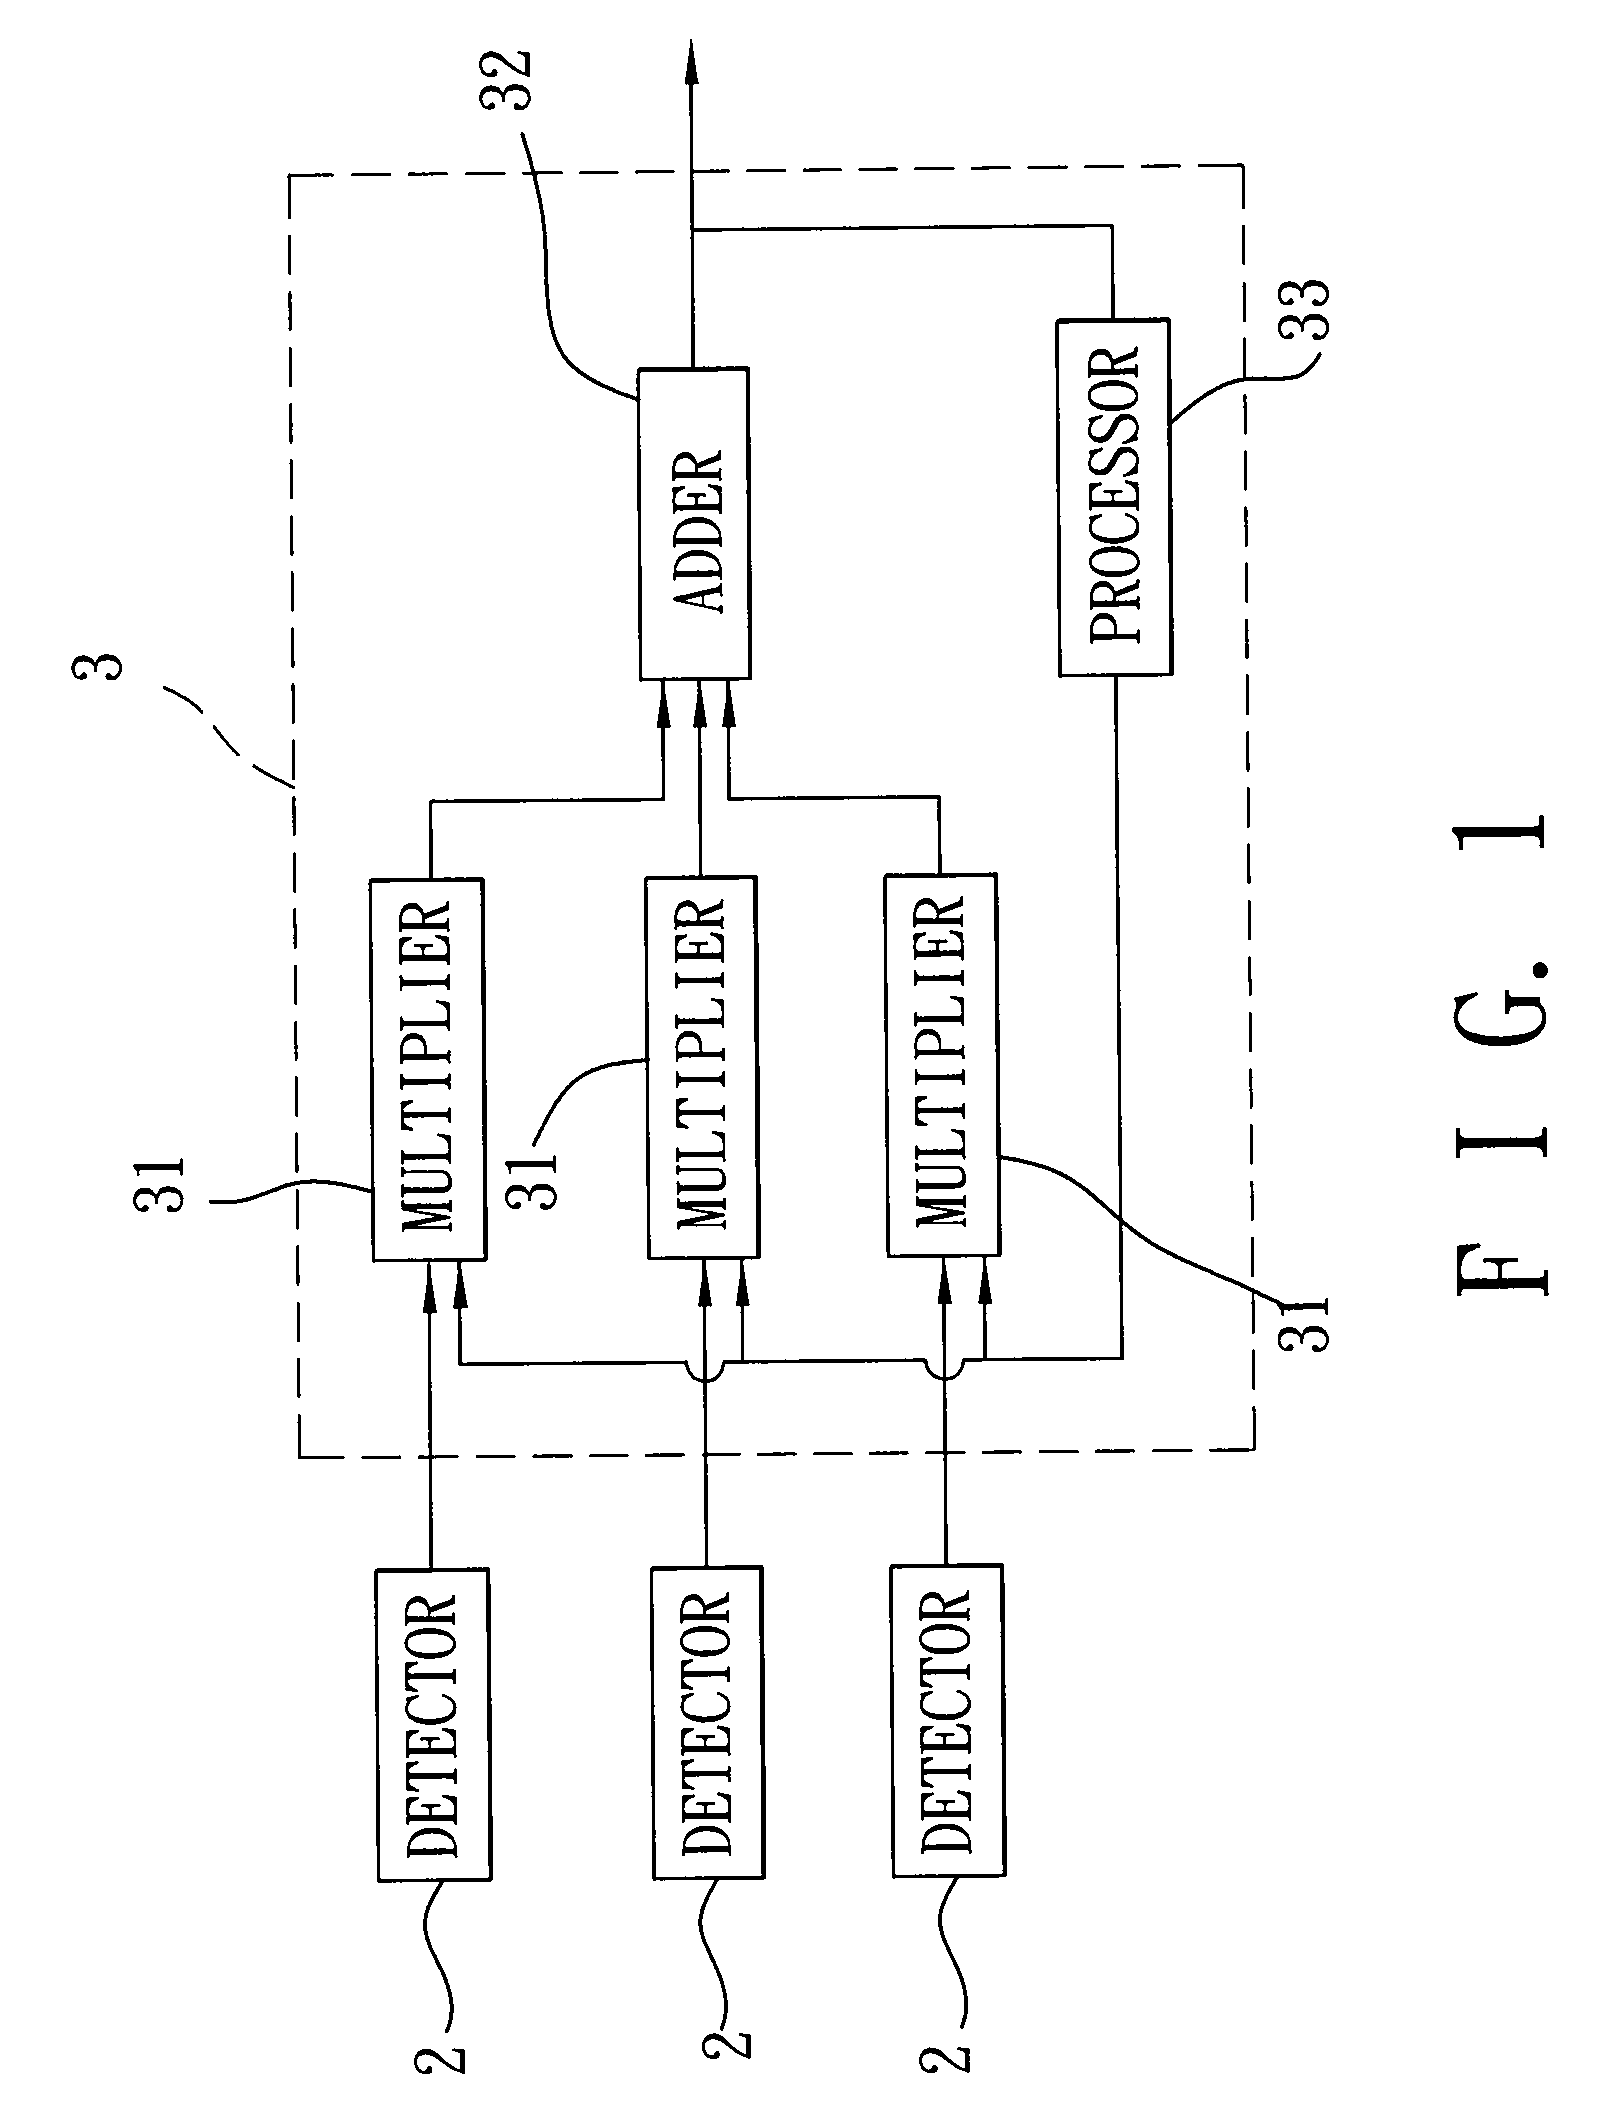 Fire detecting system and weight correcting method performed thereby